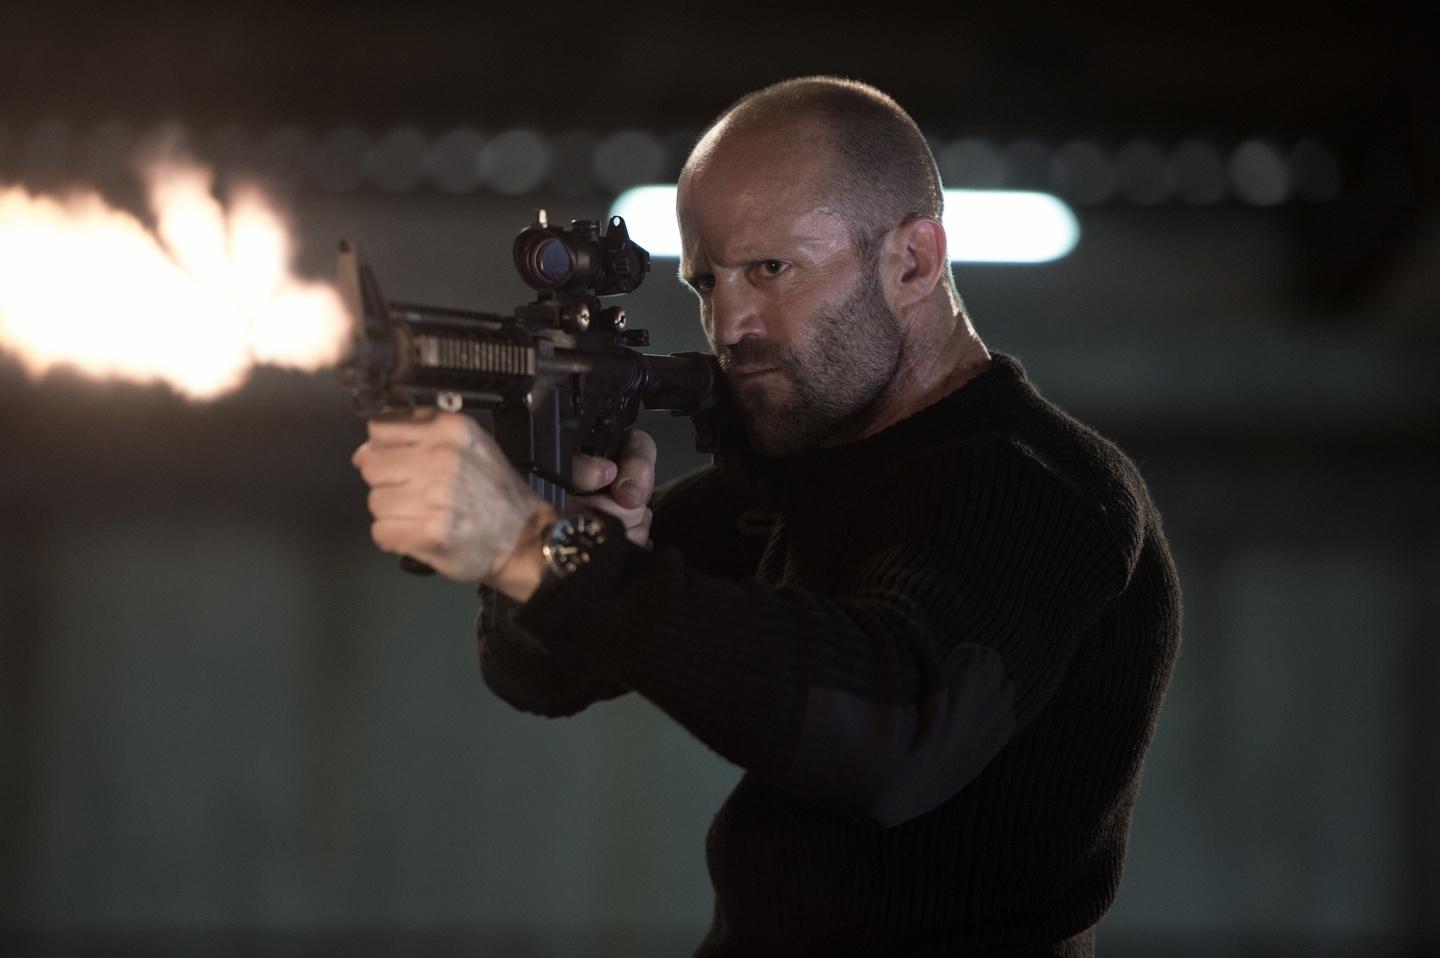 Mechanic: Resurrection, The / Mechanic 2 - Resurrection, The